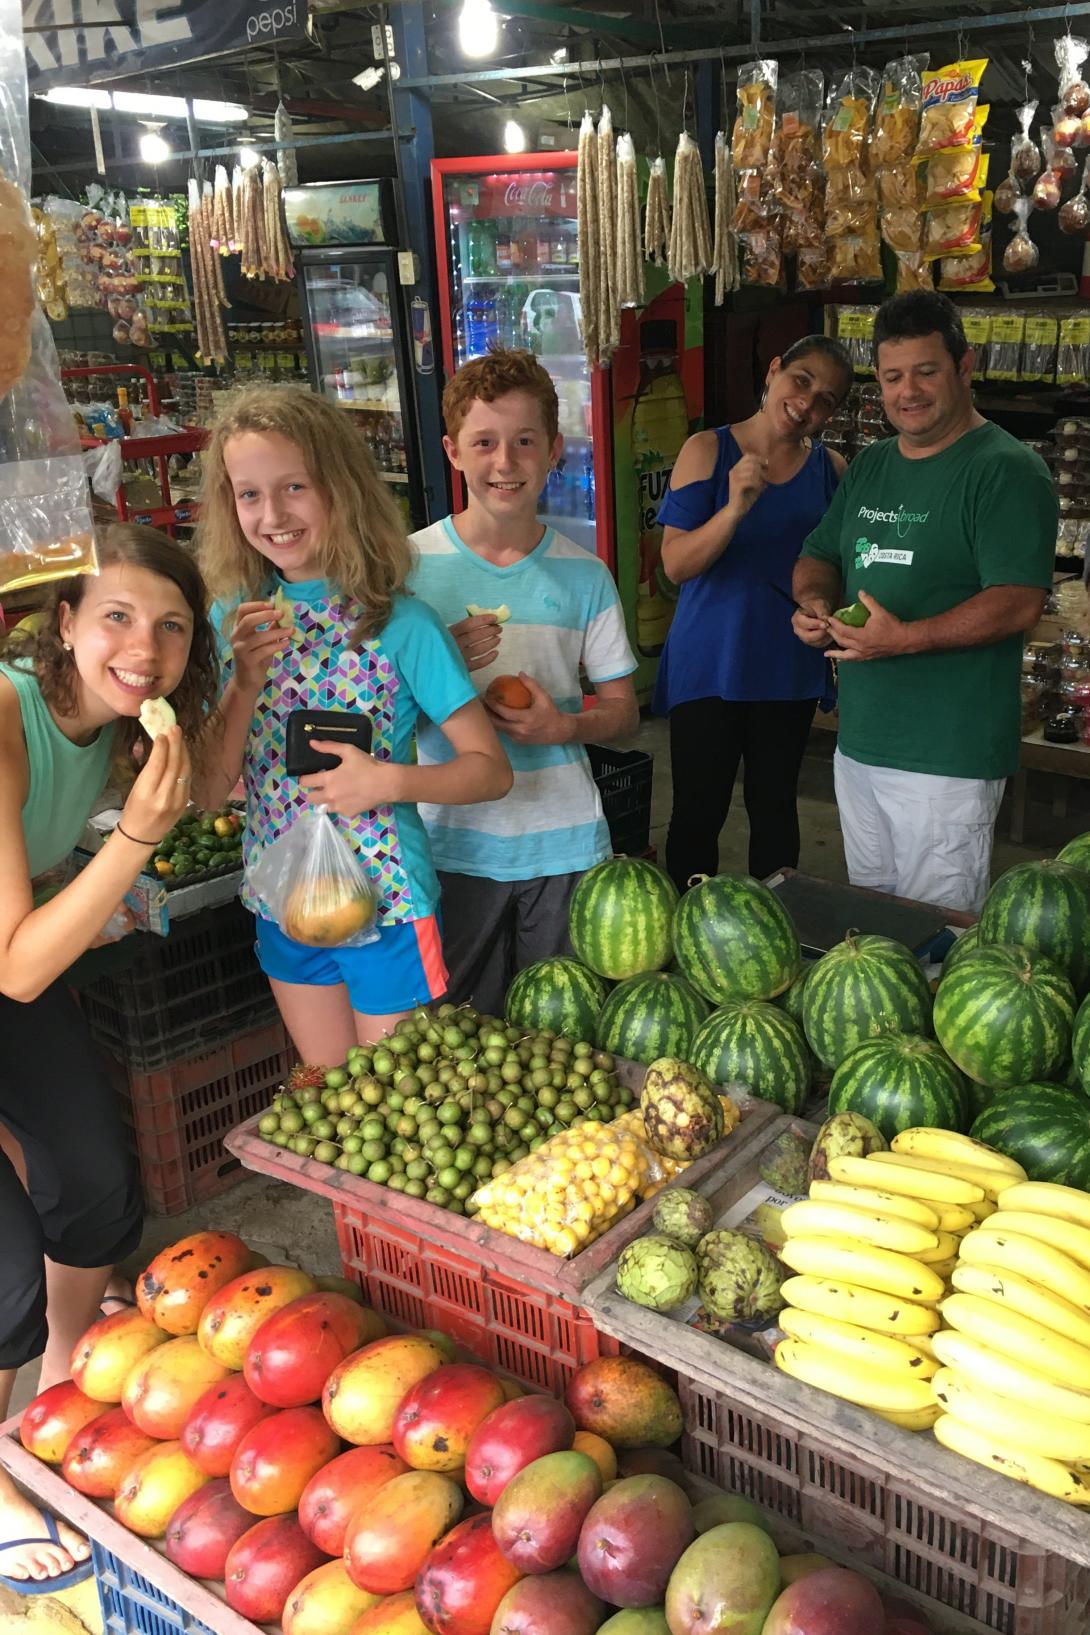 Projects Abroad volunteers looking for fresh fruit to stay healthy during travelling to Costa Rica.